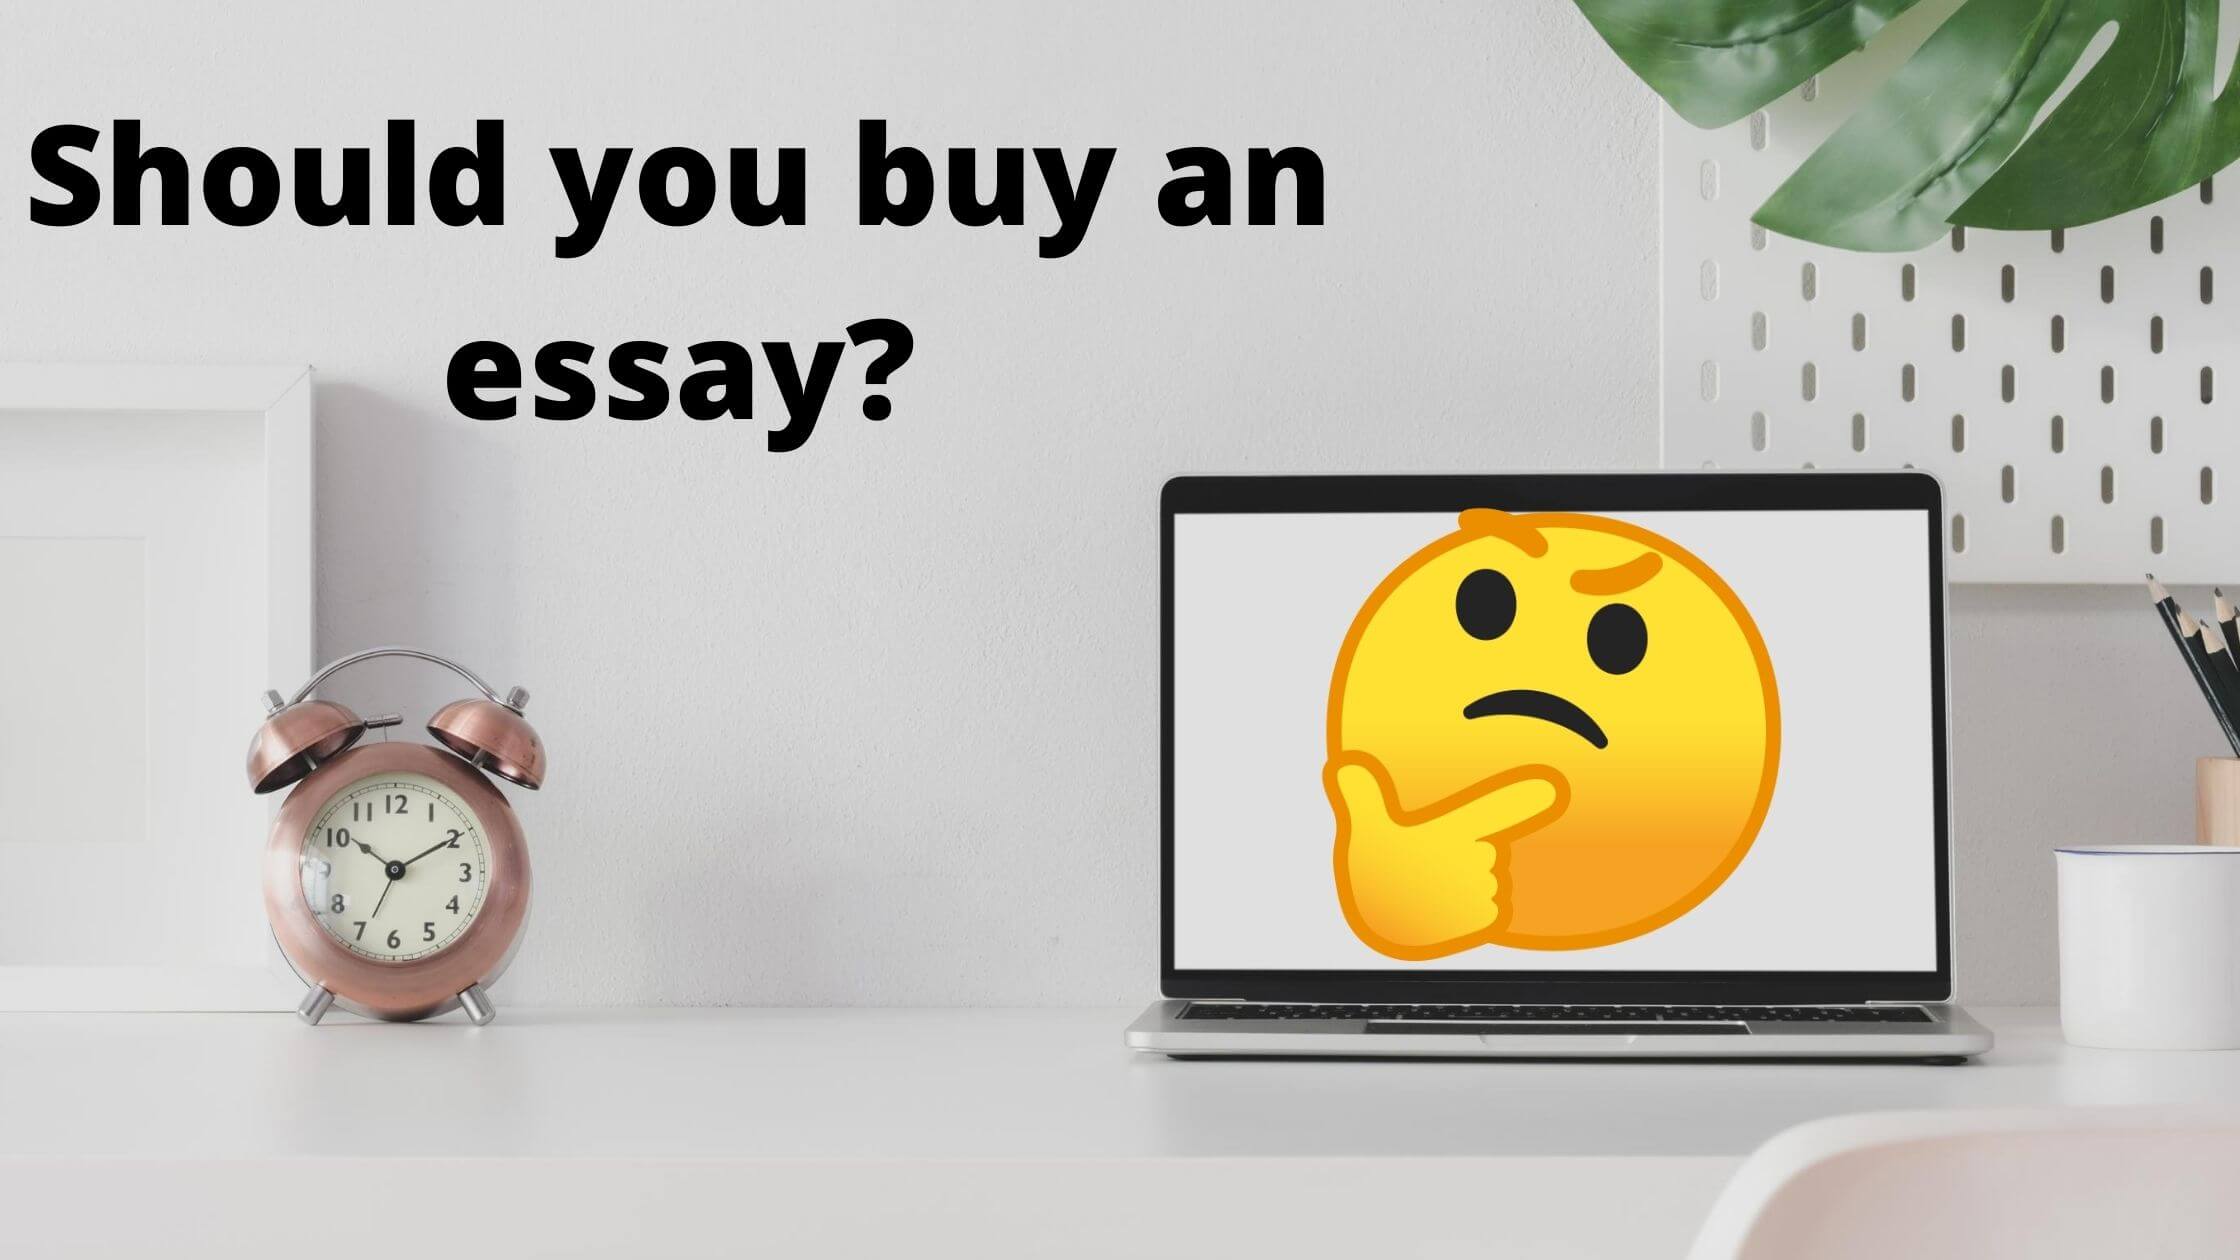 should you buy essay, is it wrong to buy an essay, is it wrong to buy a paper, is it wrong to buy a research paper